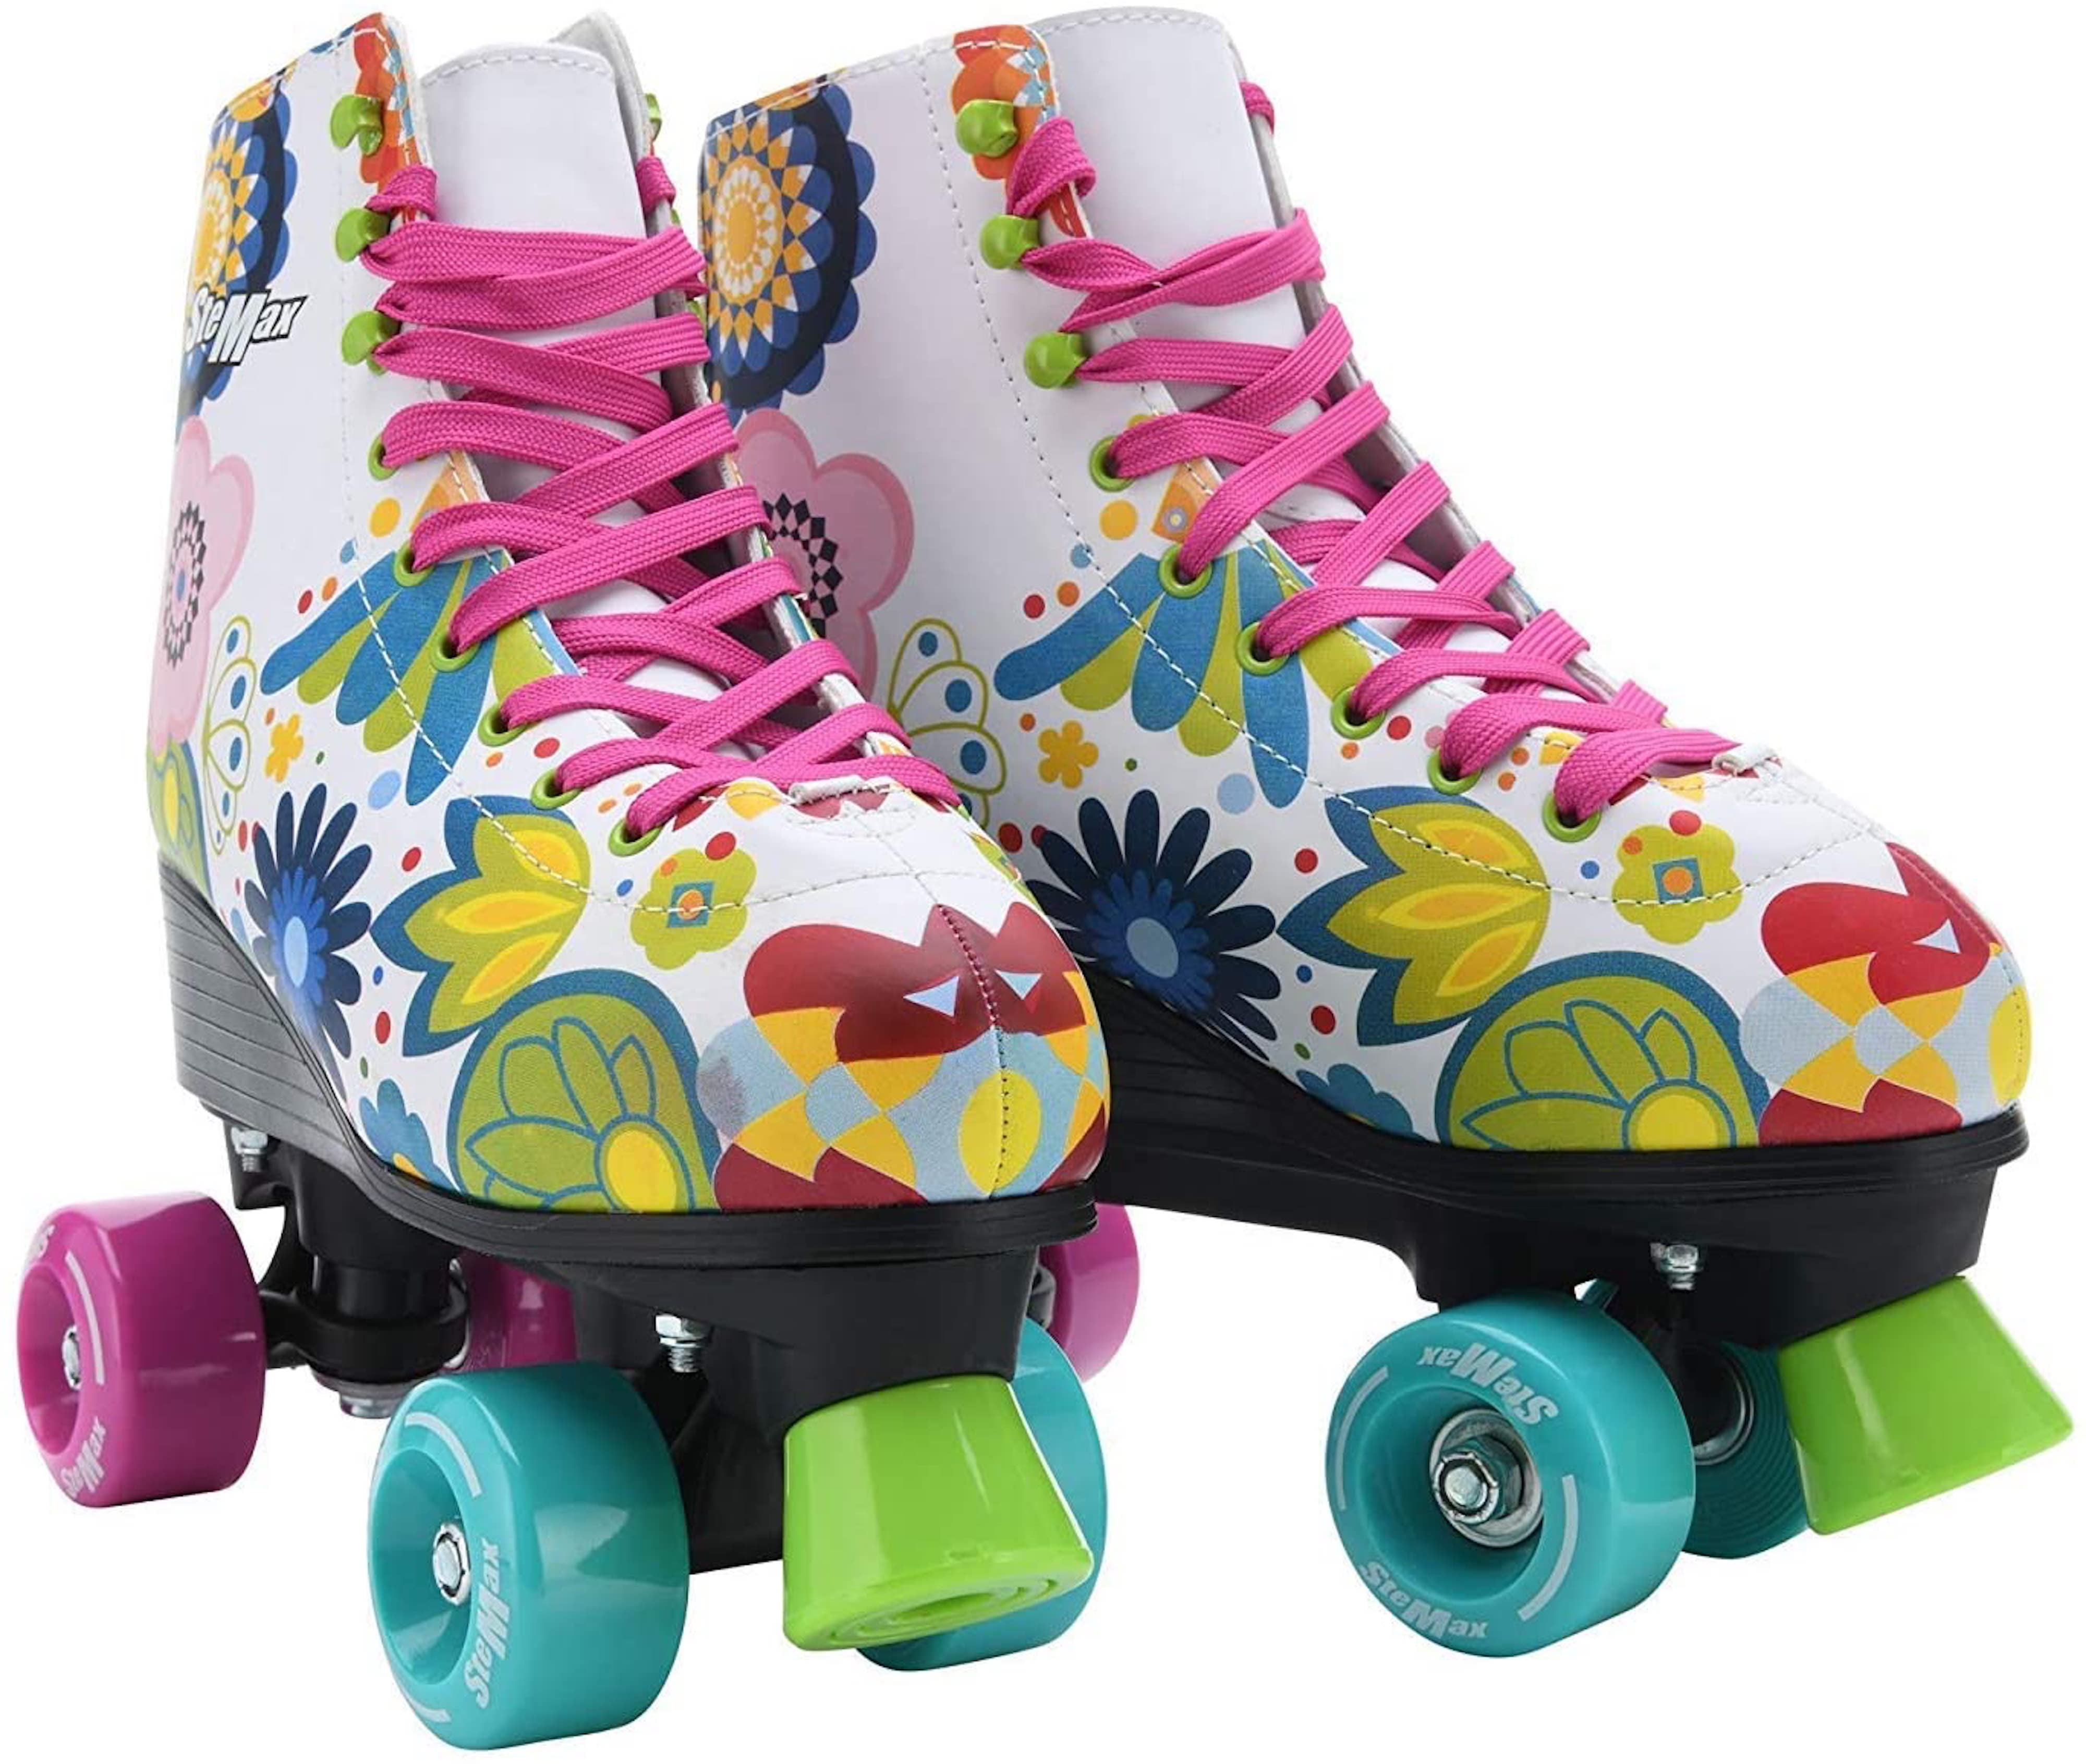 Womens Roller Skates Classic High-top Roller Skates Four-Wheel Roller Skates Shiny Roller Skates for Adult Youth Boys Girls Outdoor with Shoes Bag 